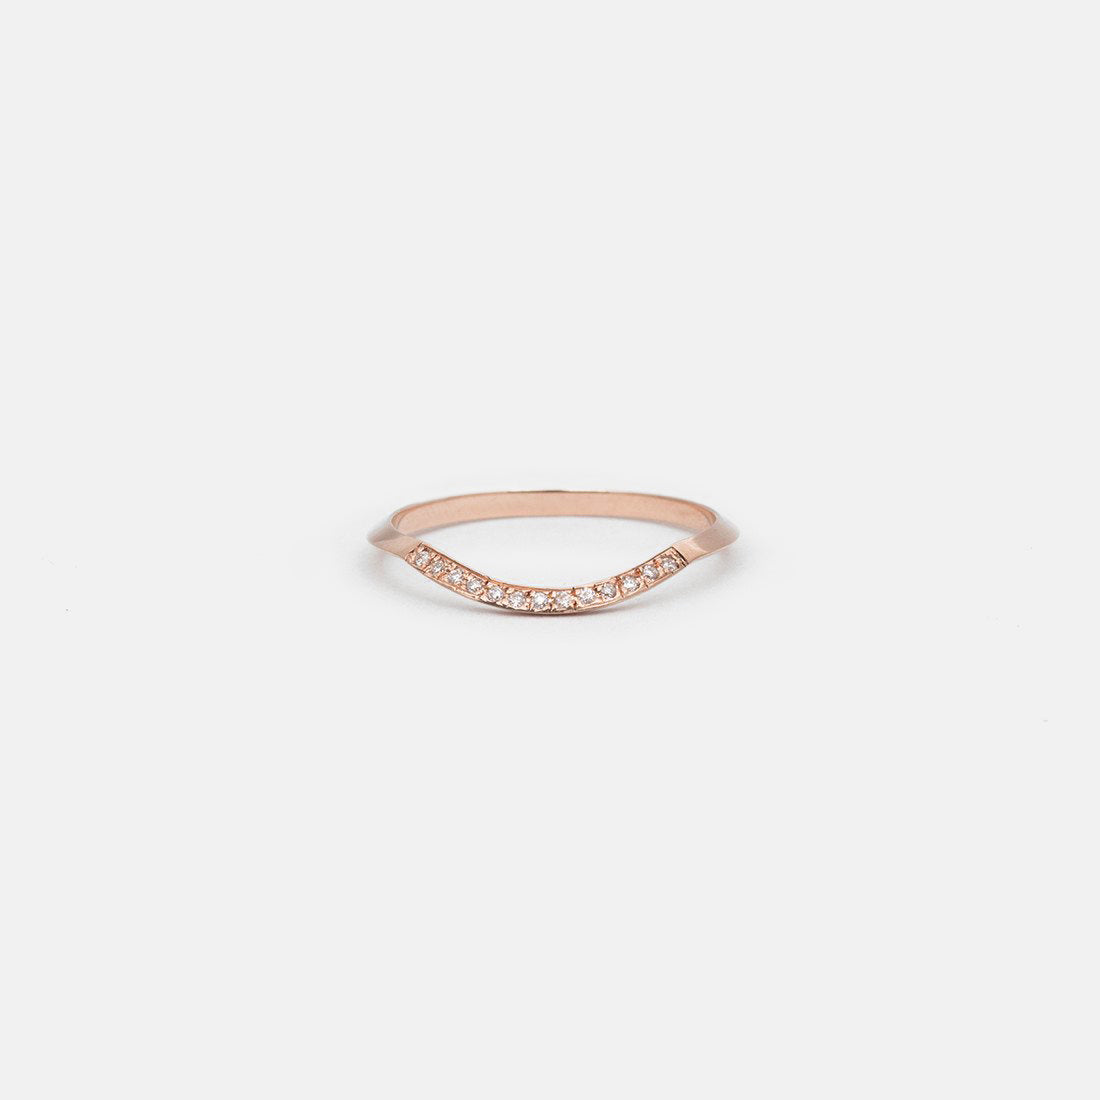 Arba Thin Ring in 14k Rose Gold set with White Diamonds By SHW Fine Jewelry NYC